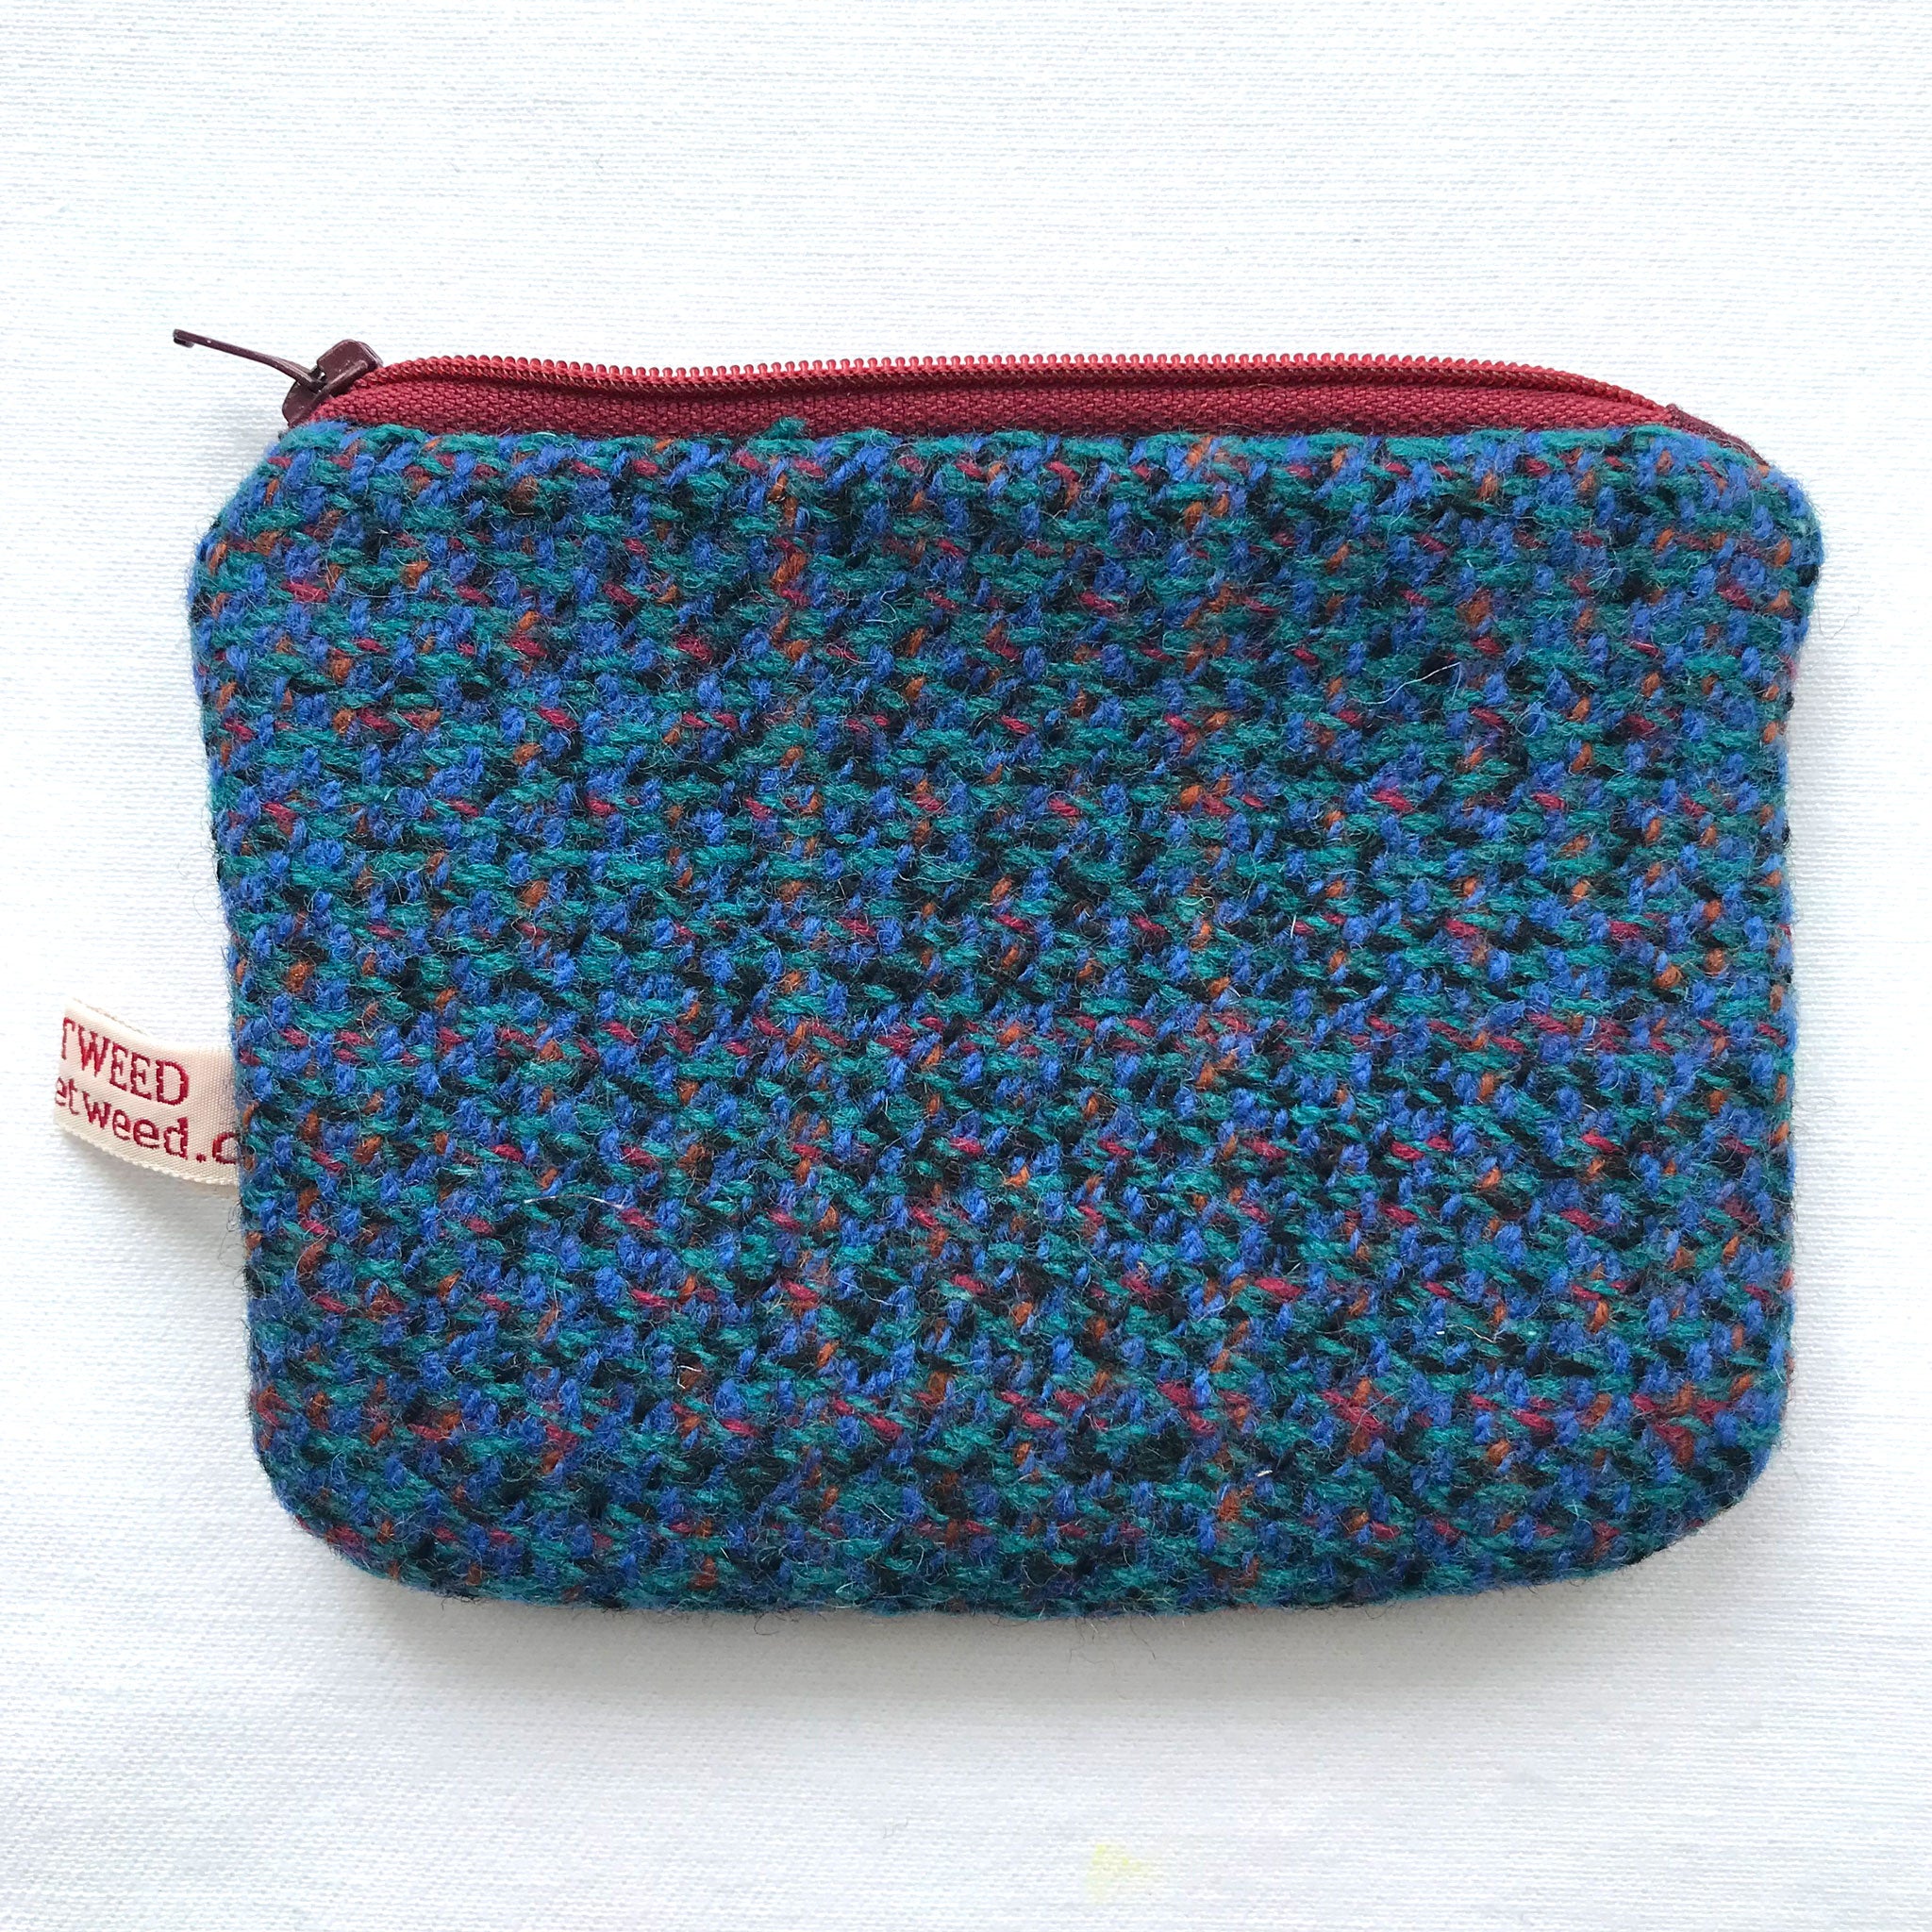 Close up of blue tweed purse with red and green dots and red zip. ReTweed label is showing.